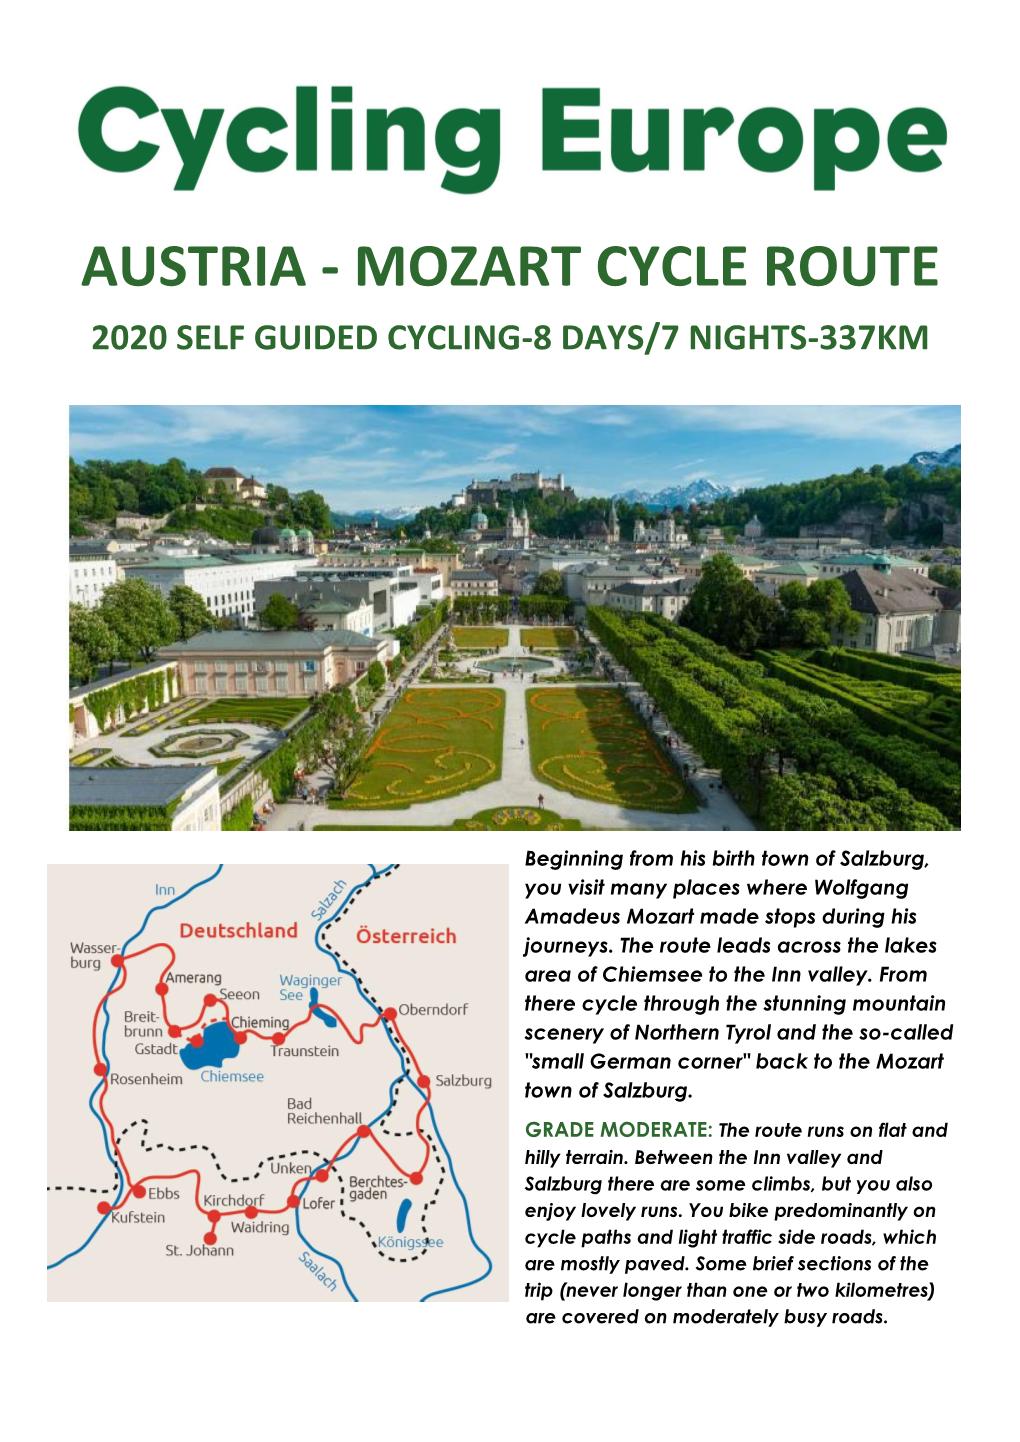 Austria - Mozart Cycle Route 2020 Self Guided Cycling-8 Days/7 Nights-337Km